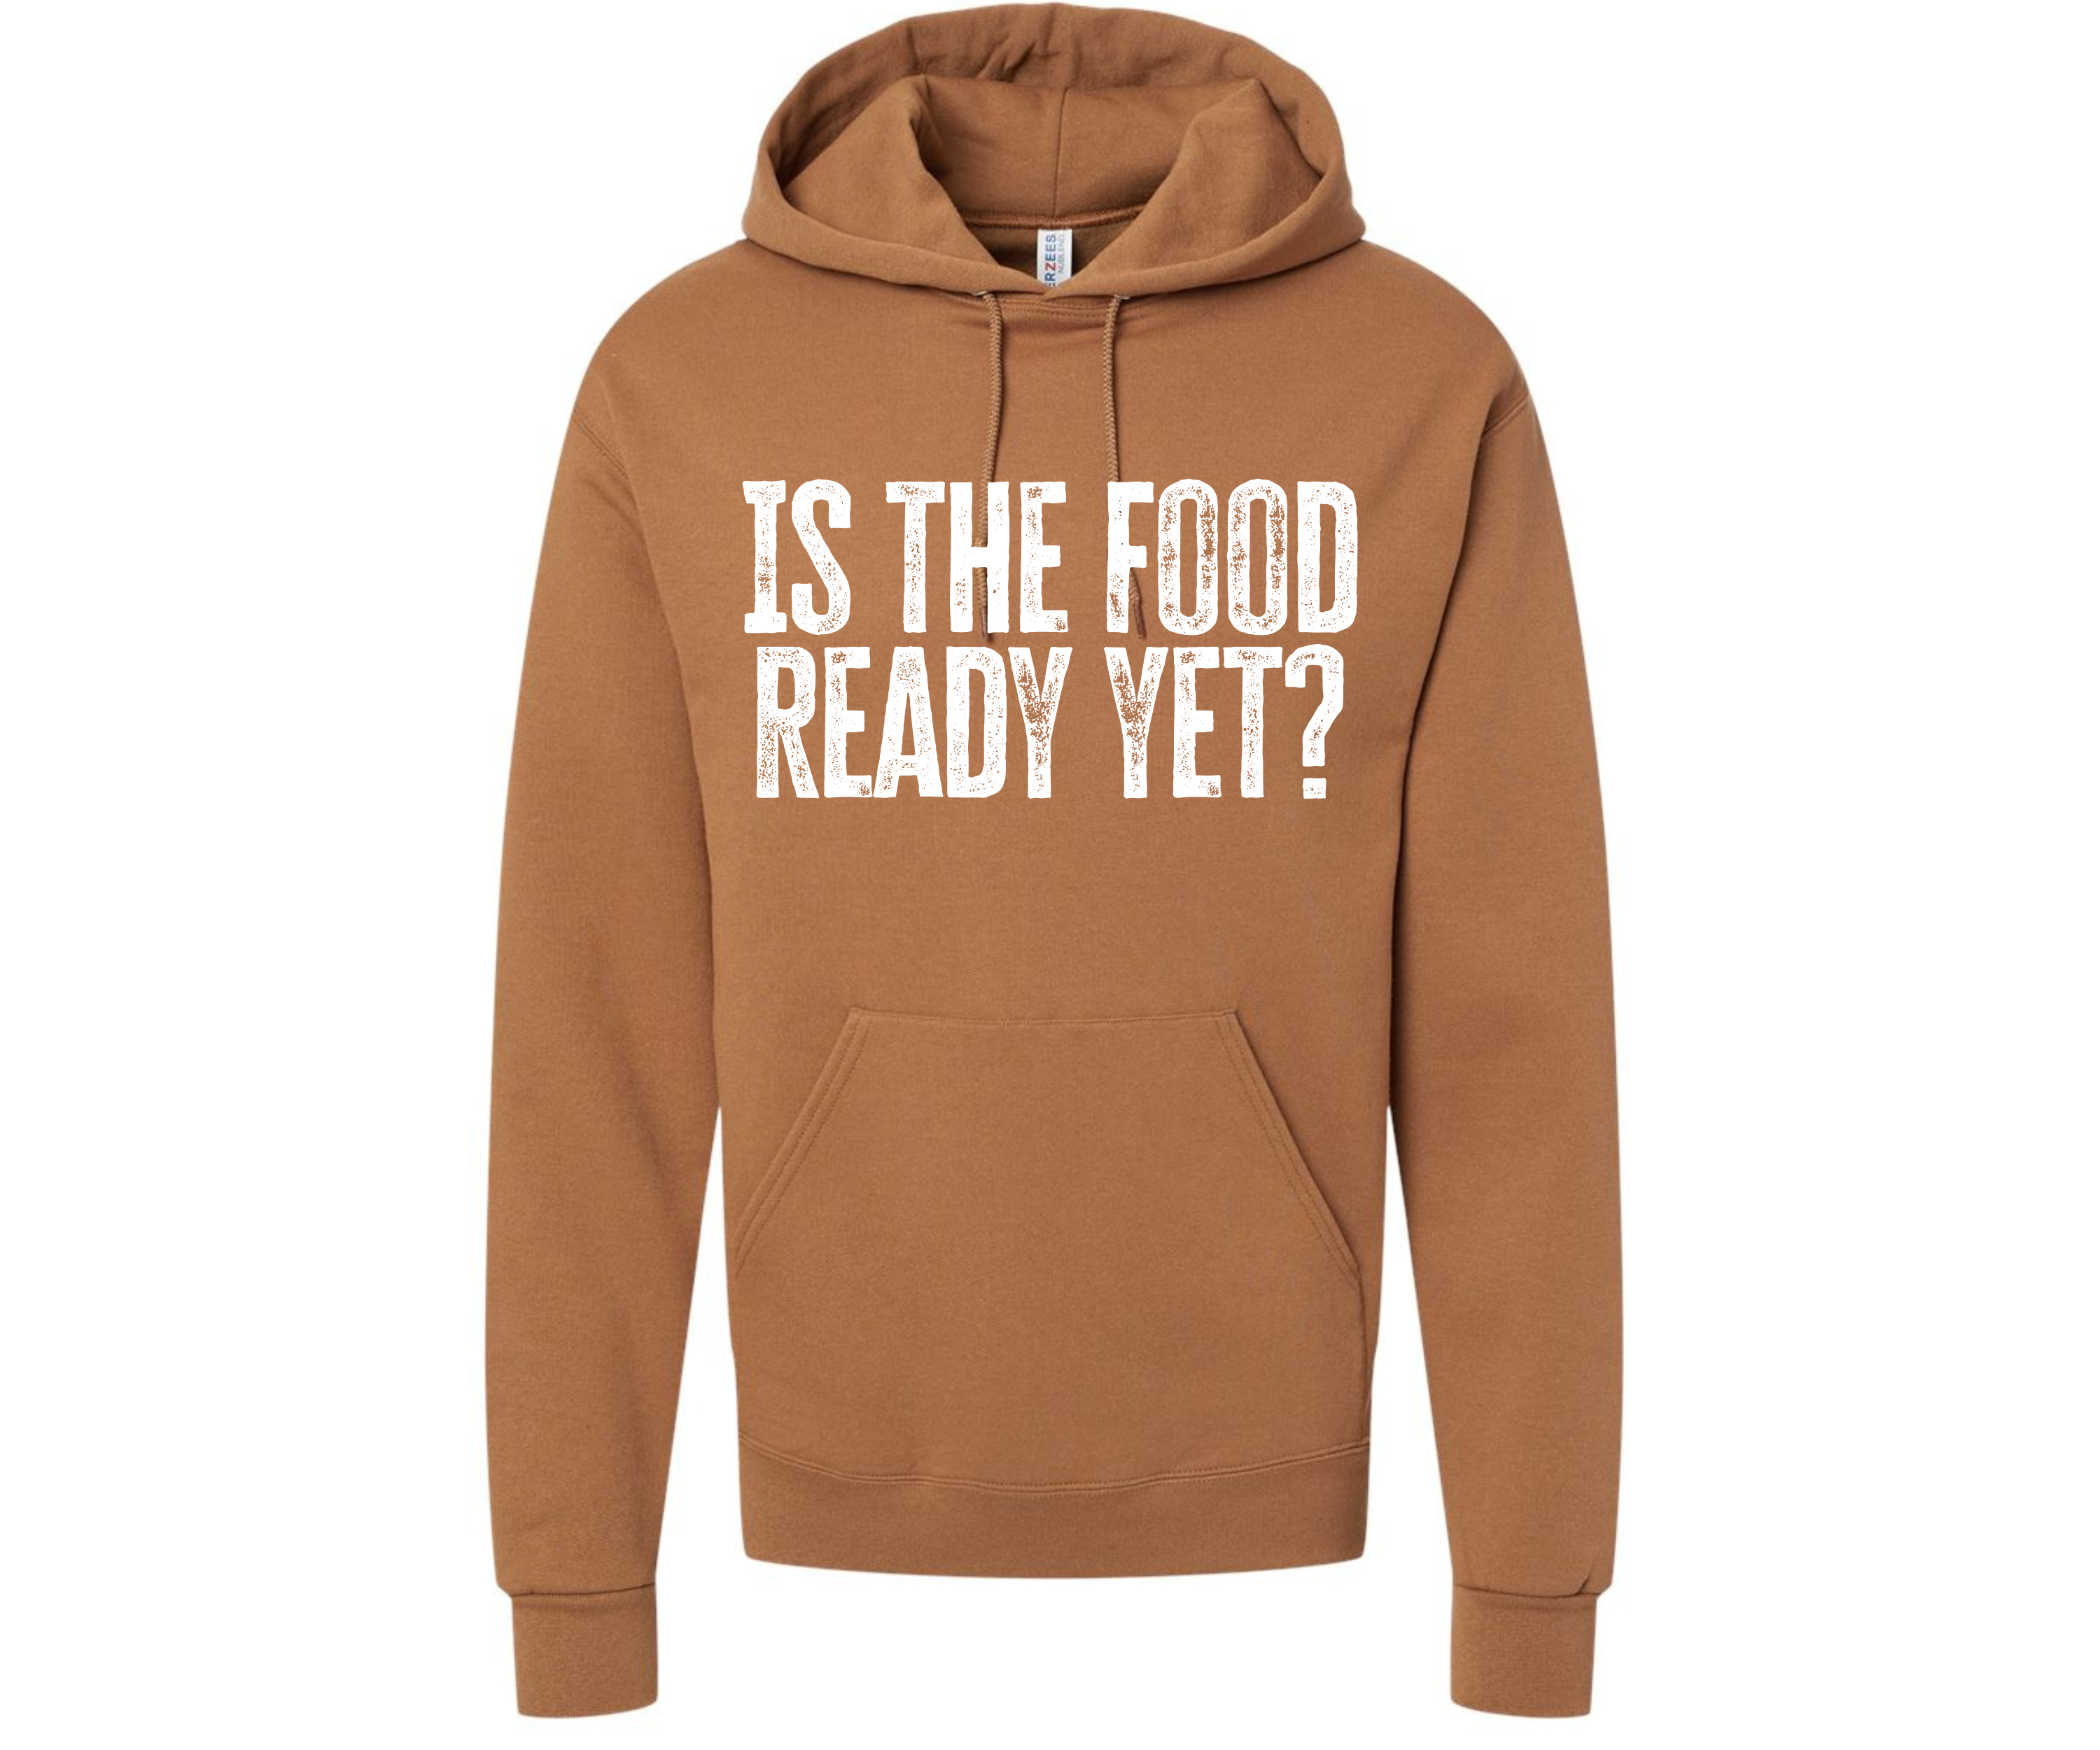 Is the Food Ready Yet? Unisex Family Matching Hooded Sweatshirt-clothing and culture-shop here at-A Perfect Shirt